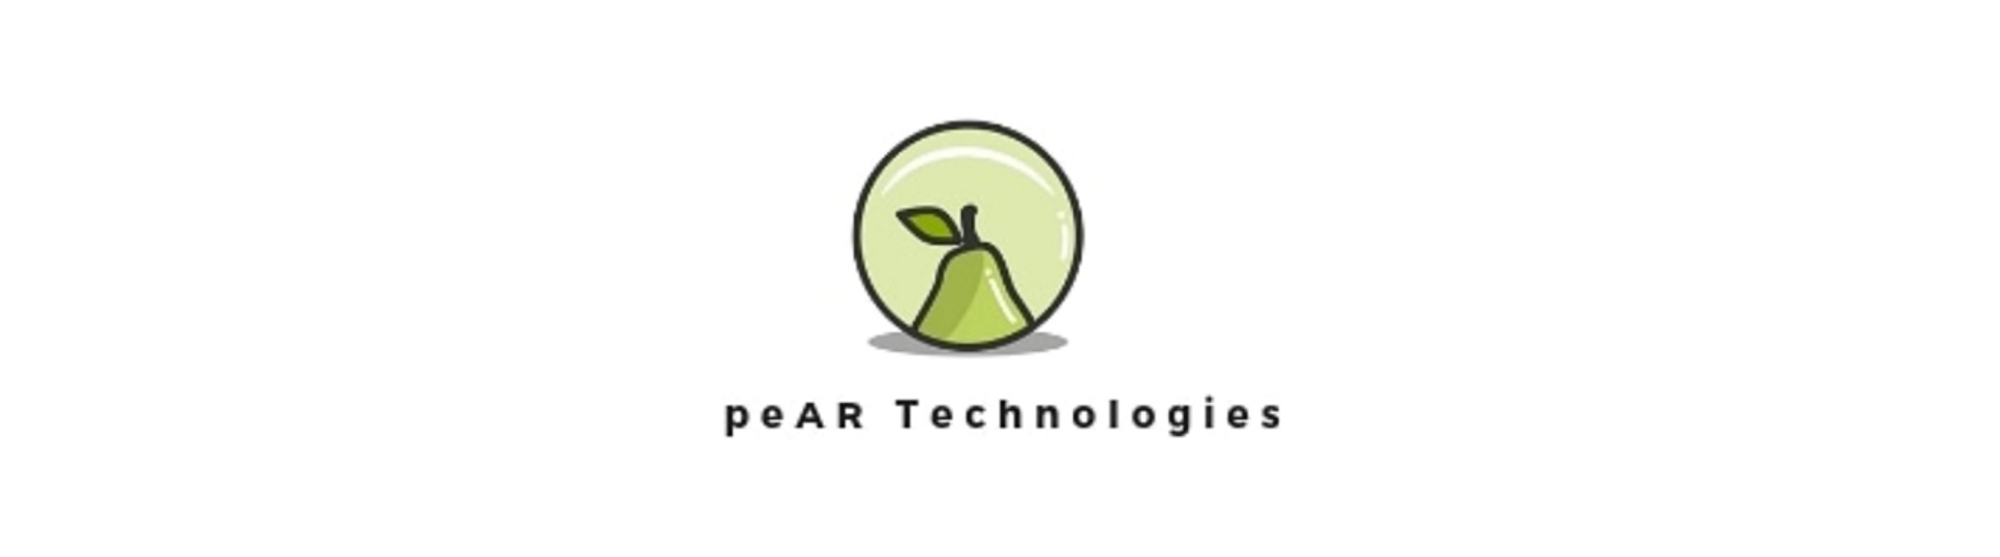 peAR Technologies Cover Image